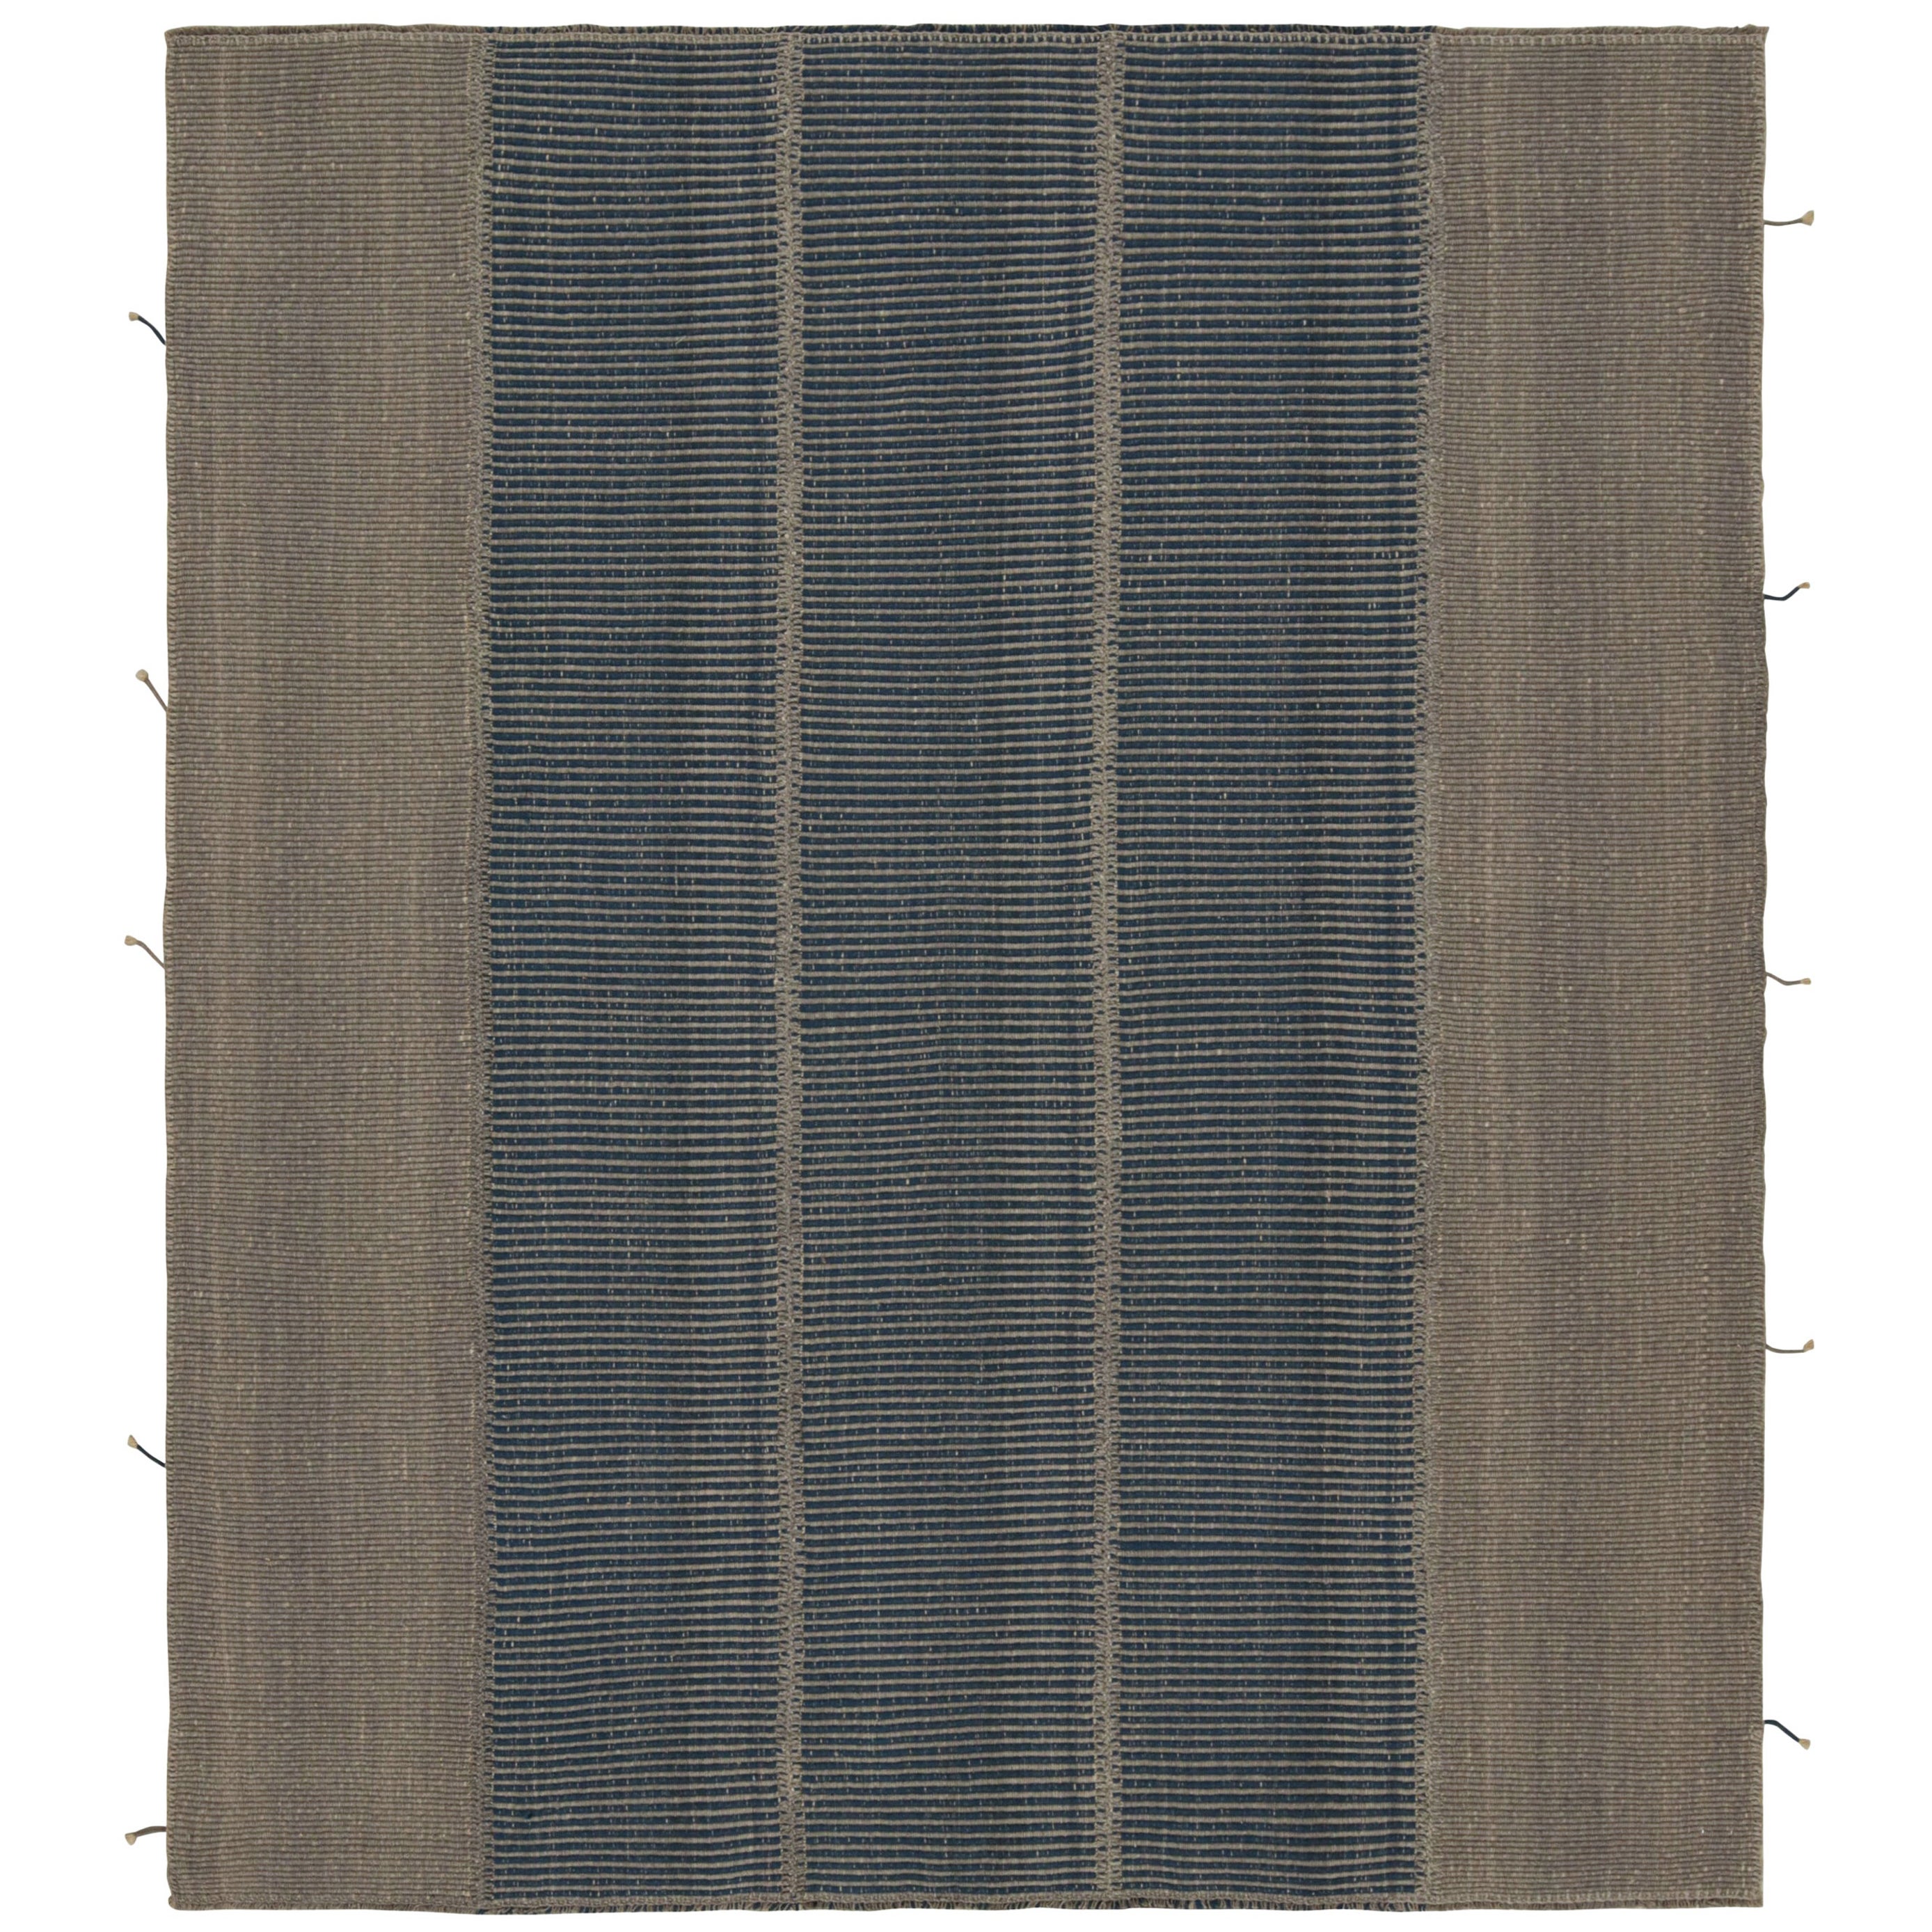 Rug & Kilim’s Contemporary Kilim in Gray and Blue Textural Stripes 